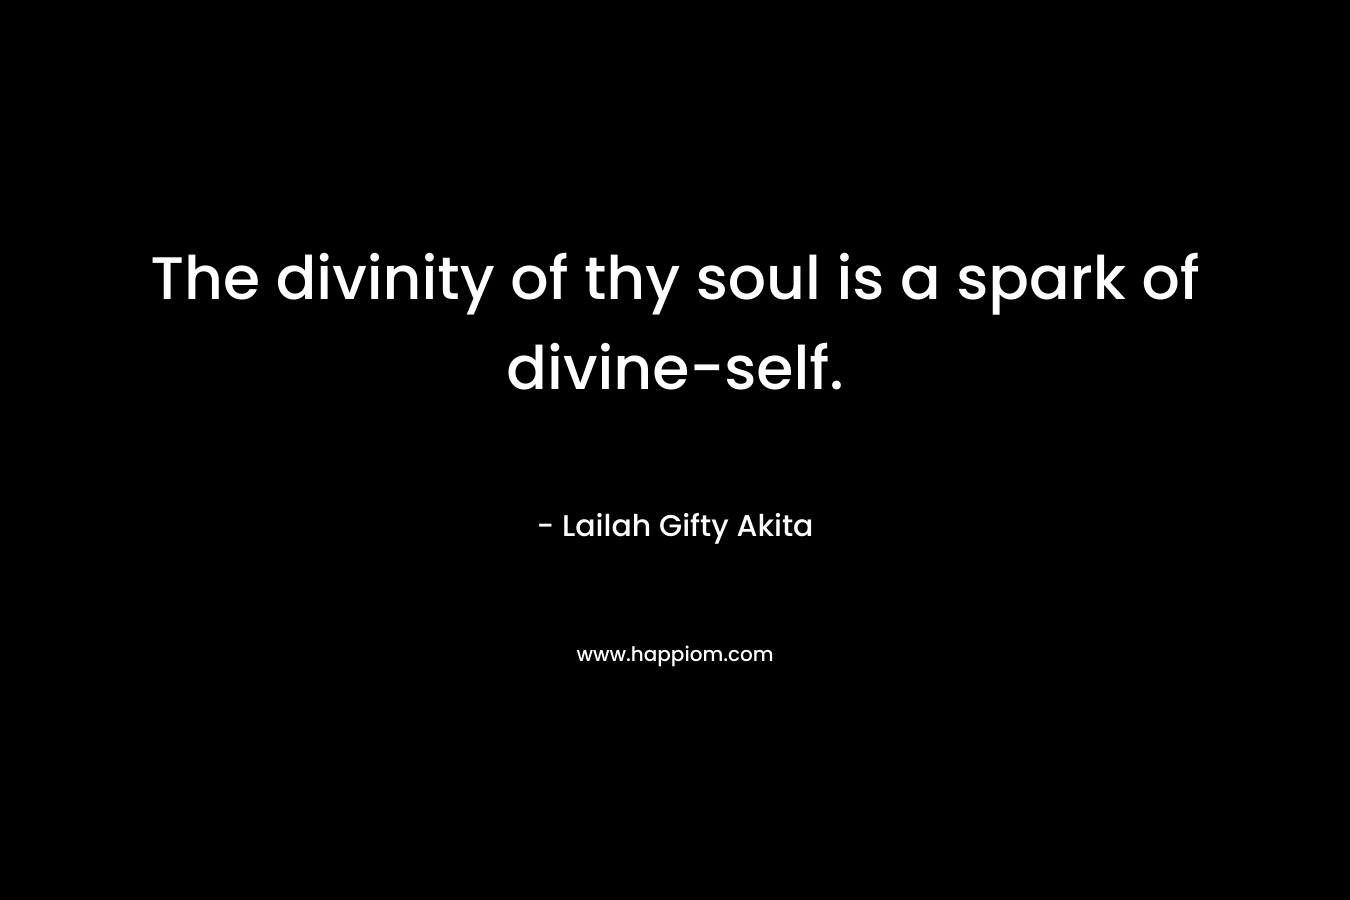 The divinity of thy soul is a spark of divine-self.